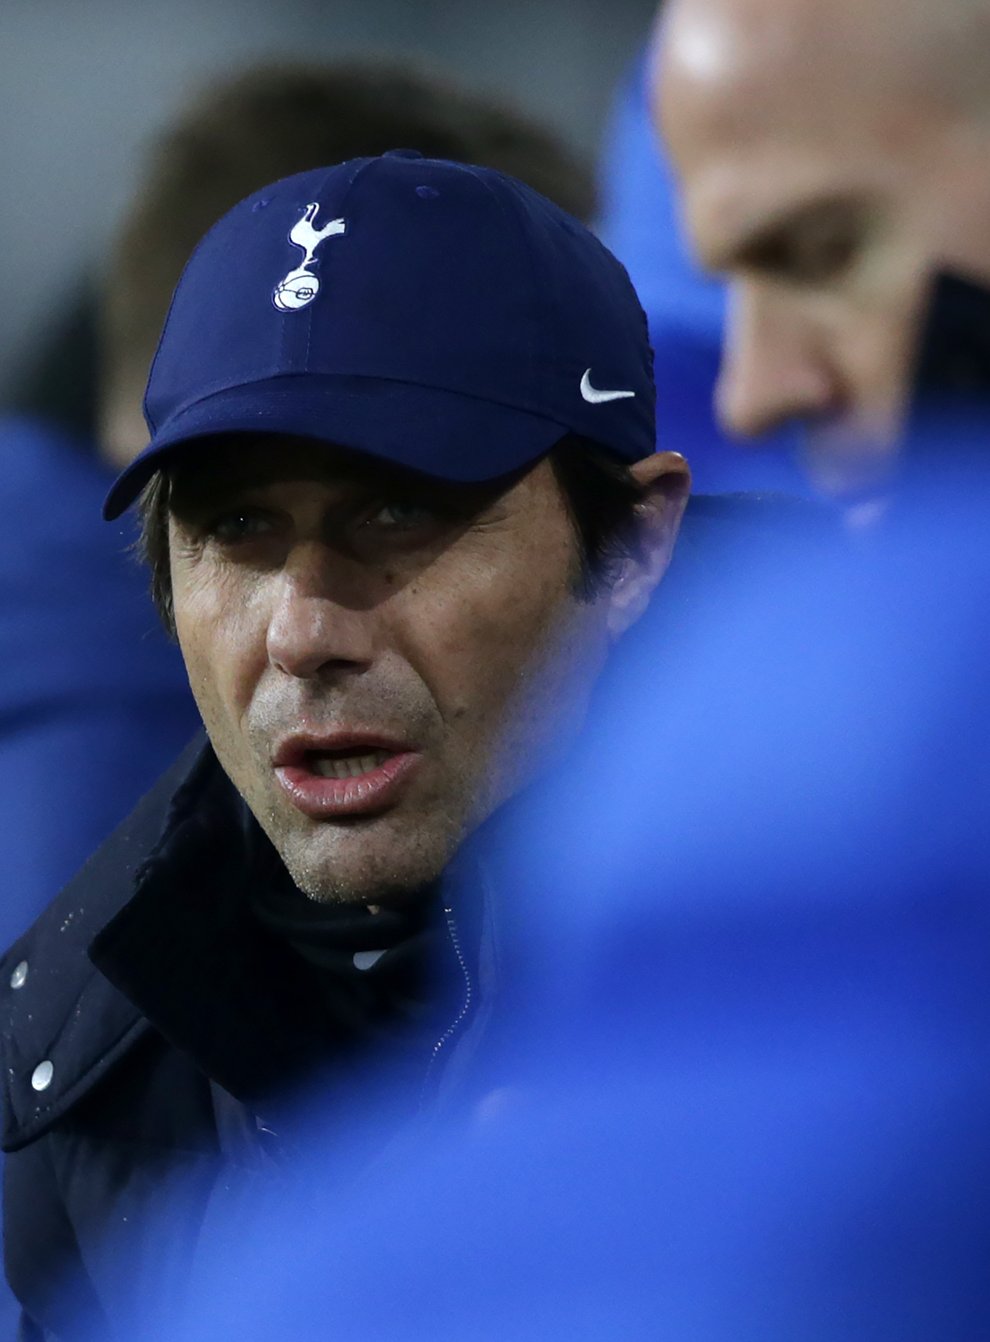 Antonio Conte appeared to question if he is the right man for Tottenham (Ian Hodgson/PA)